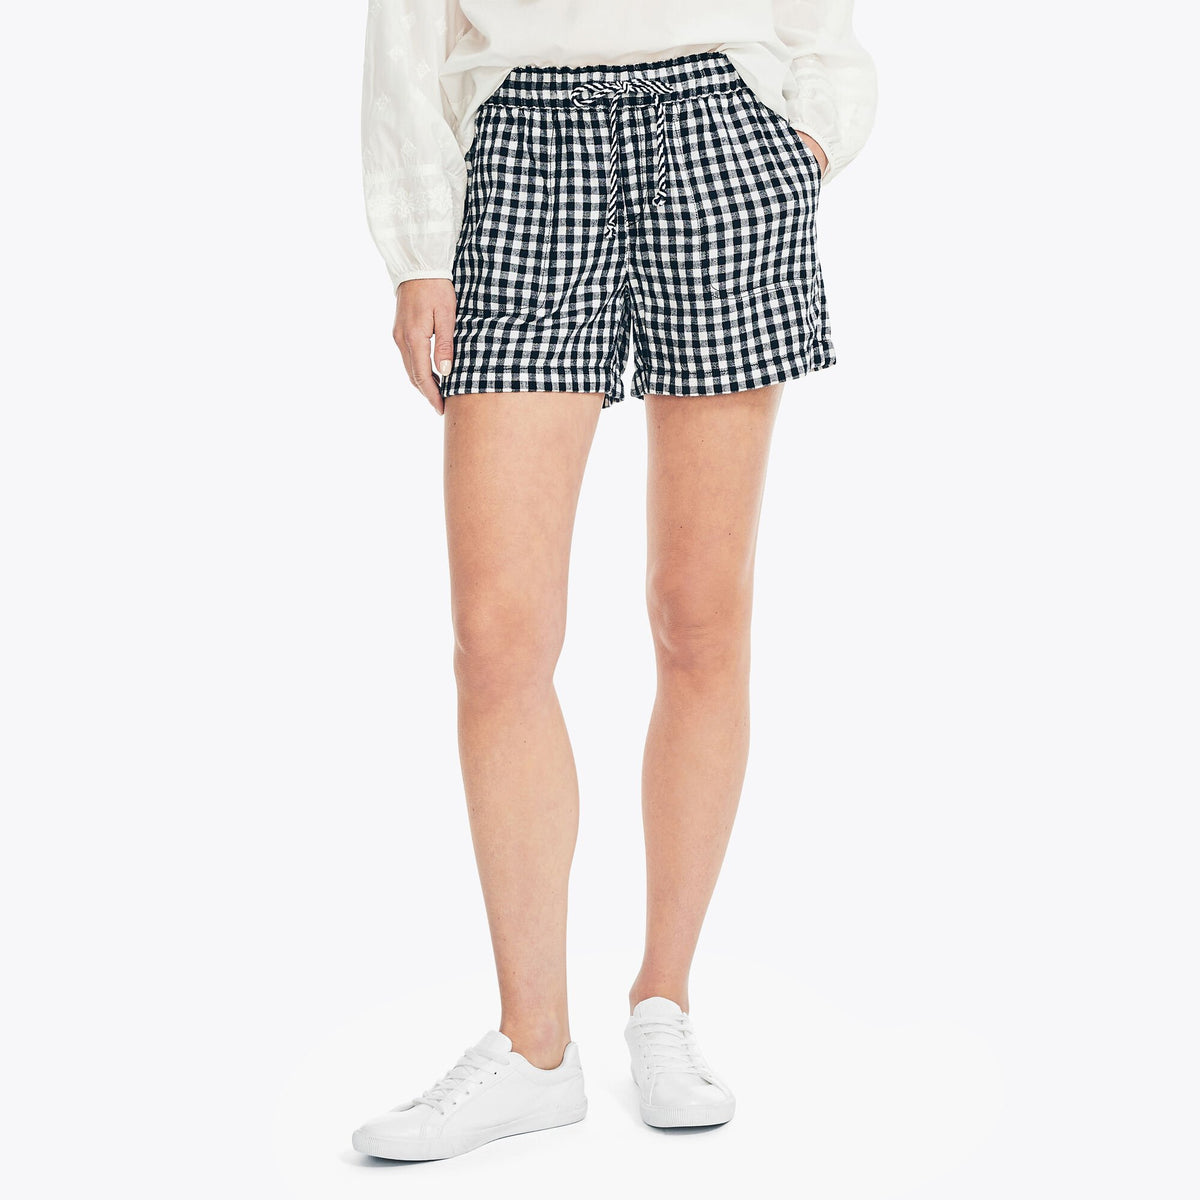 Nautica Women's 4.5" Sustainably Crafted Pull-On Gingham Short True Black